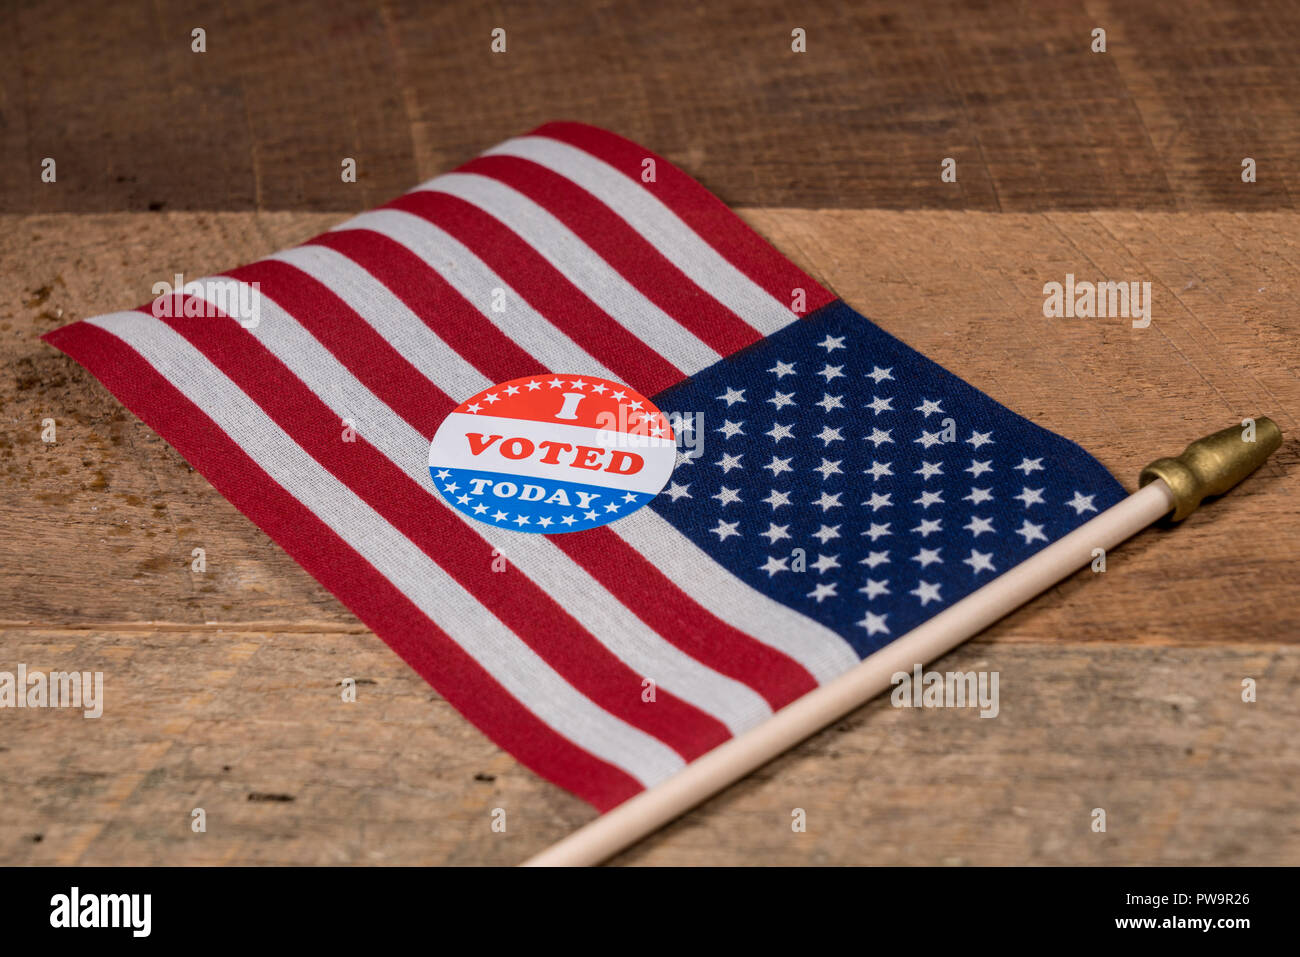 I Voted Today paper sticker on US Flag and rural wooden table Stock Photo